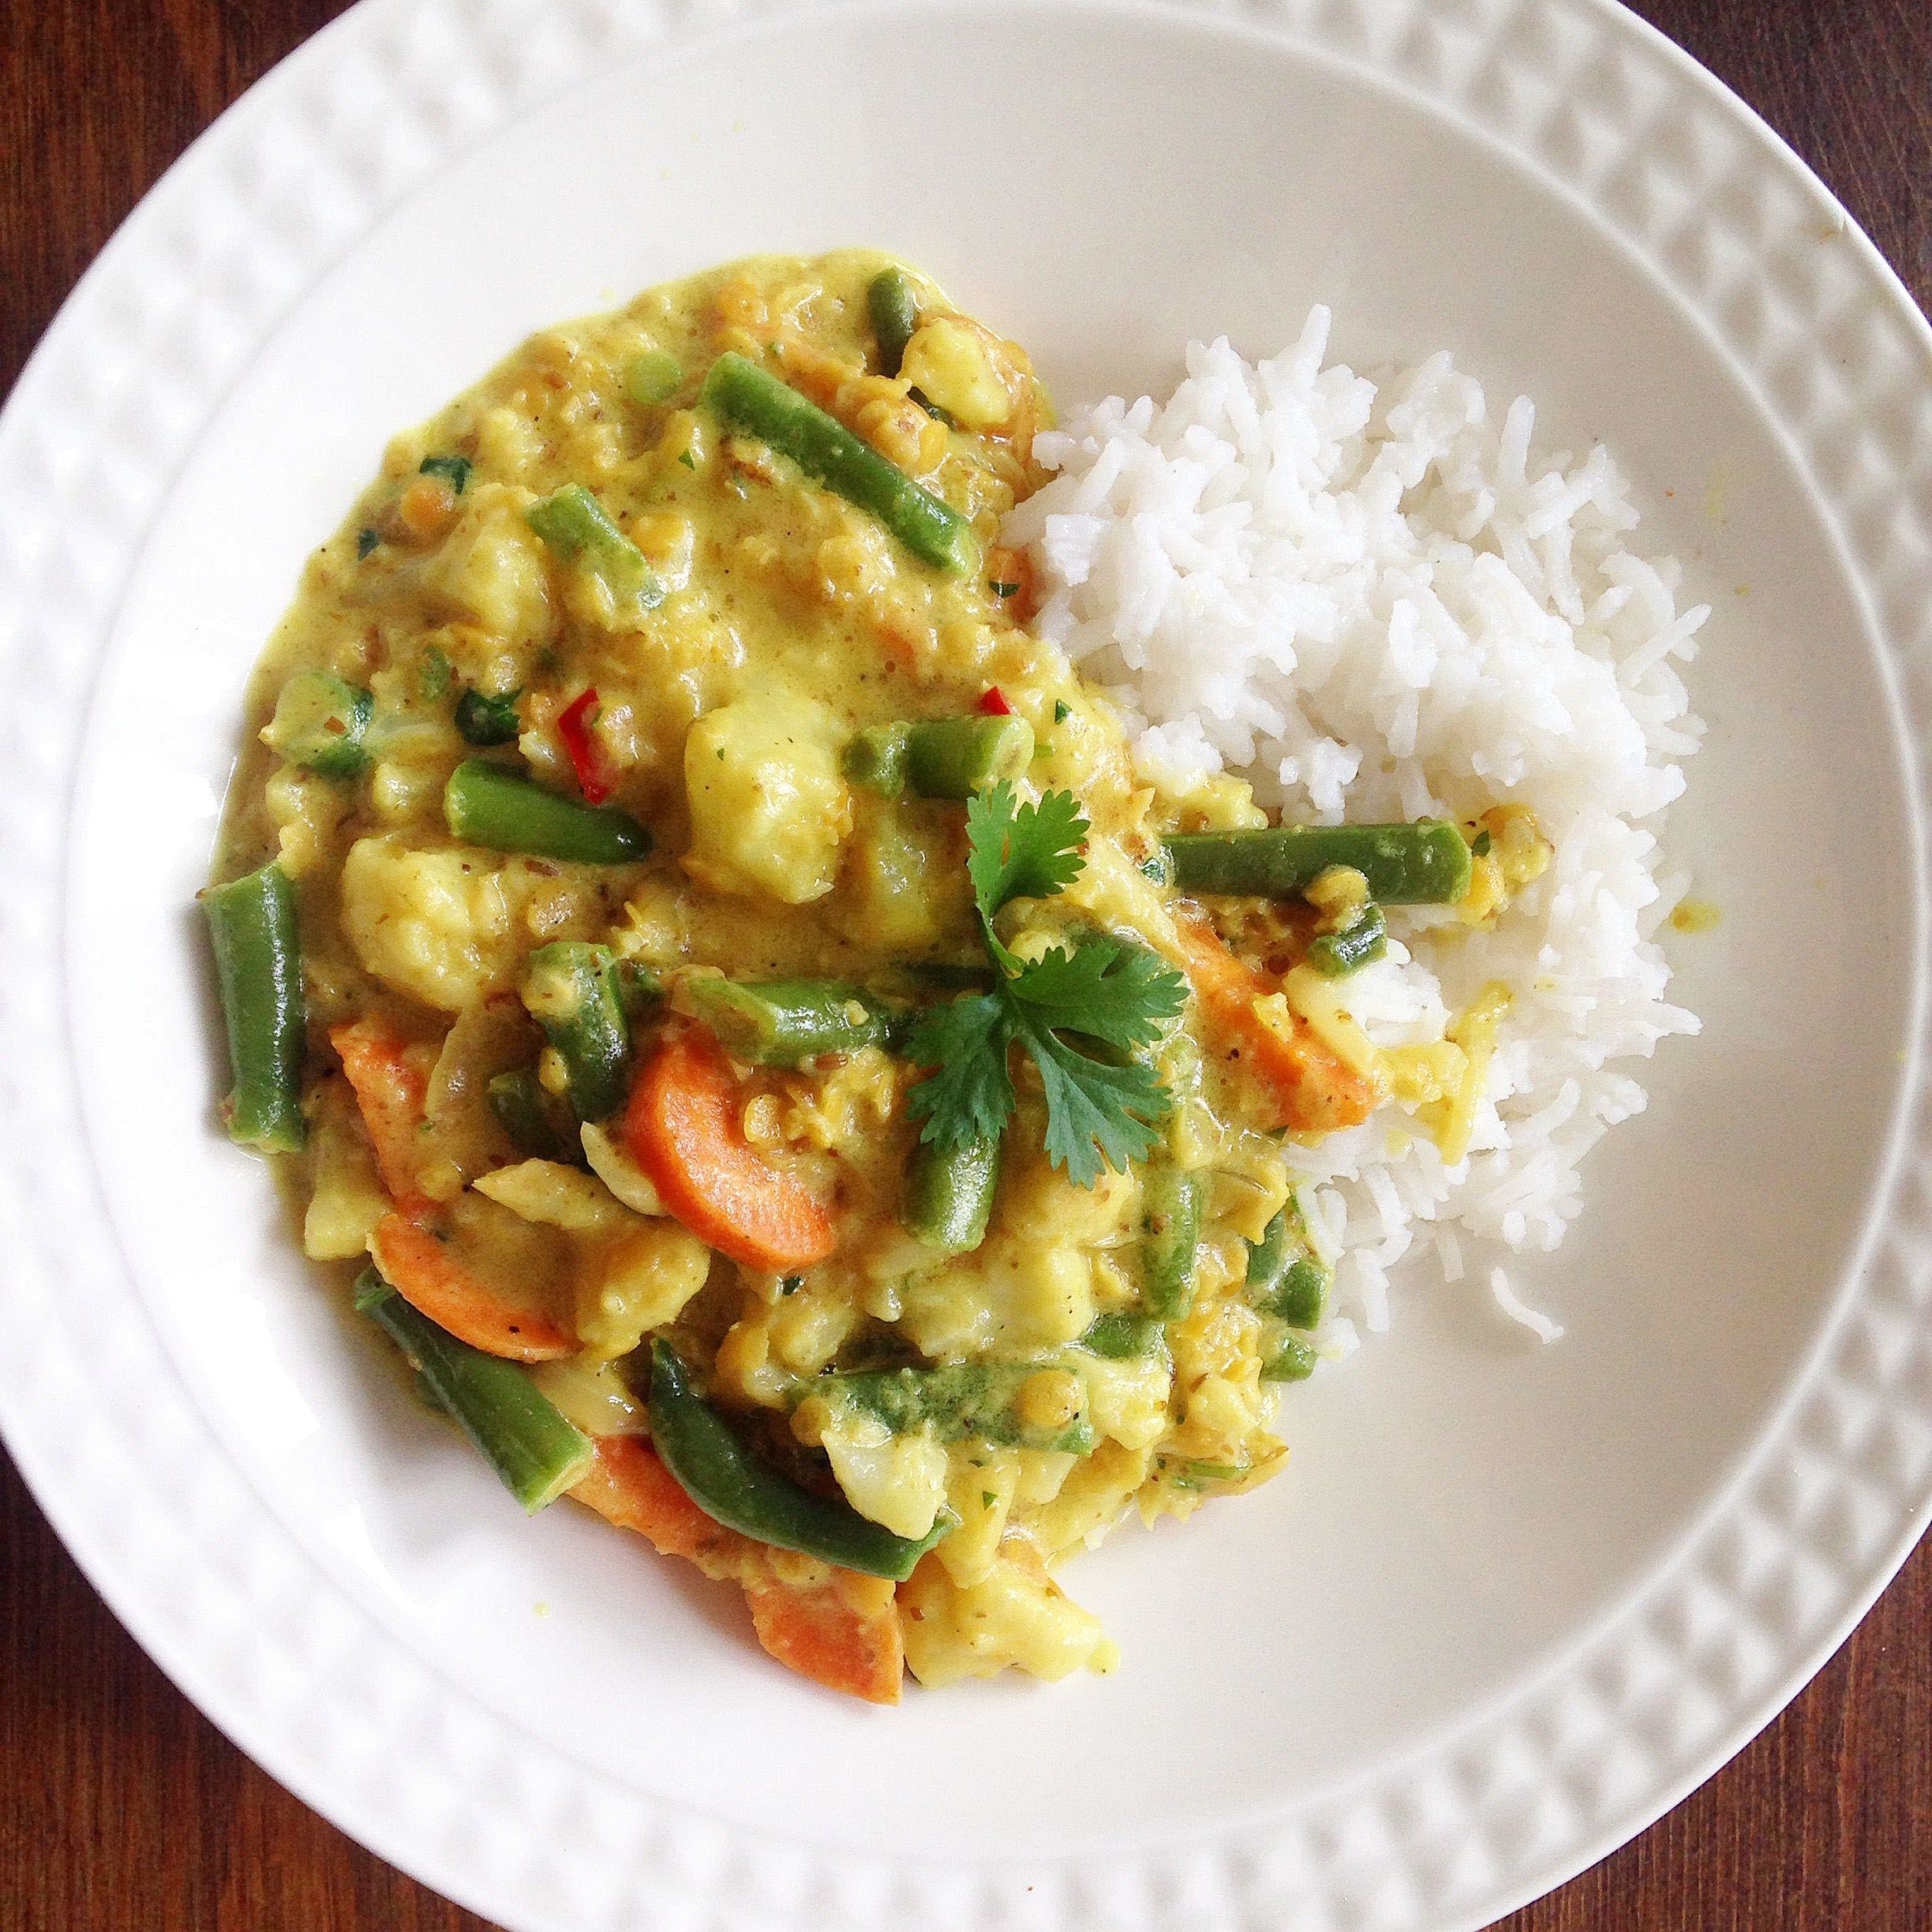 Vegan Indian Curry with Cauliflower and Lentils